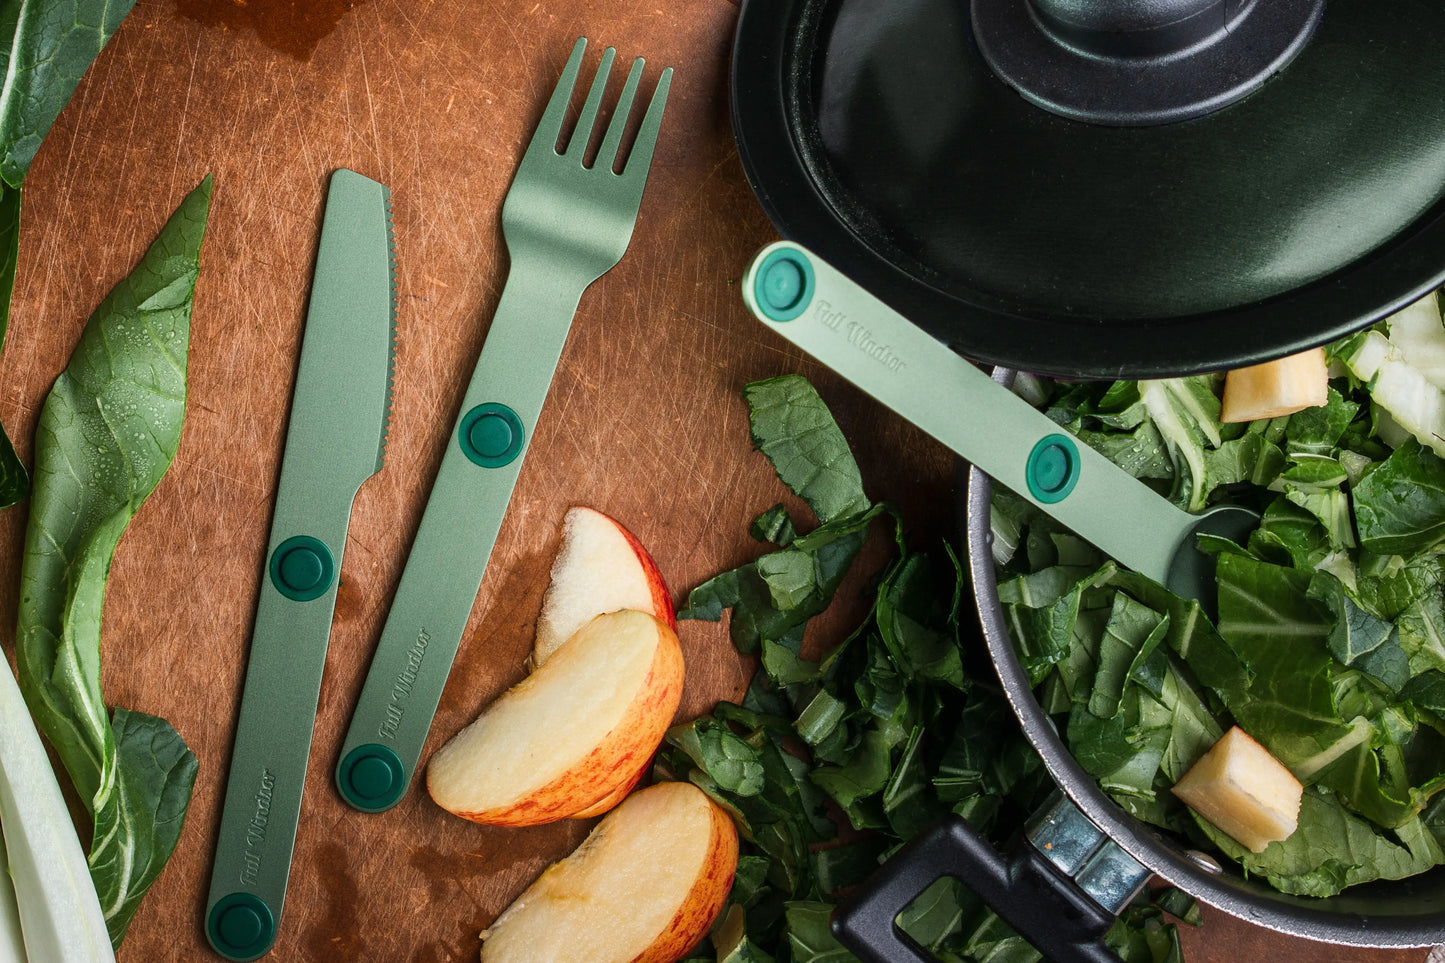 Magware - Magnetic Flatware - Forest Green